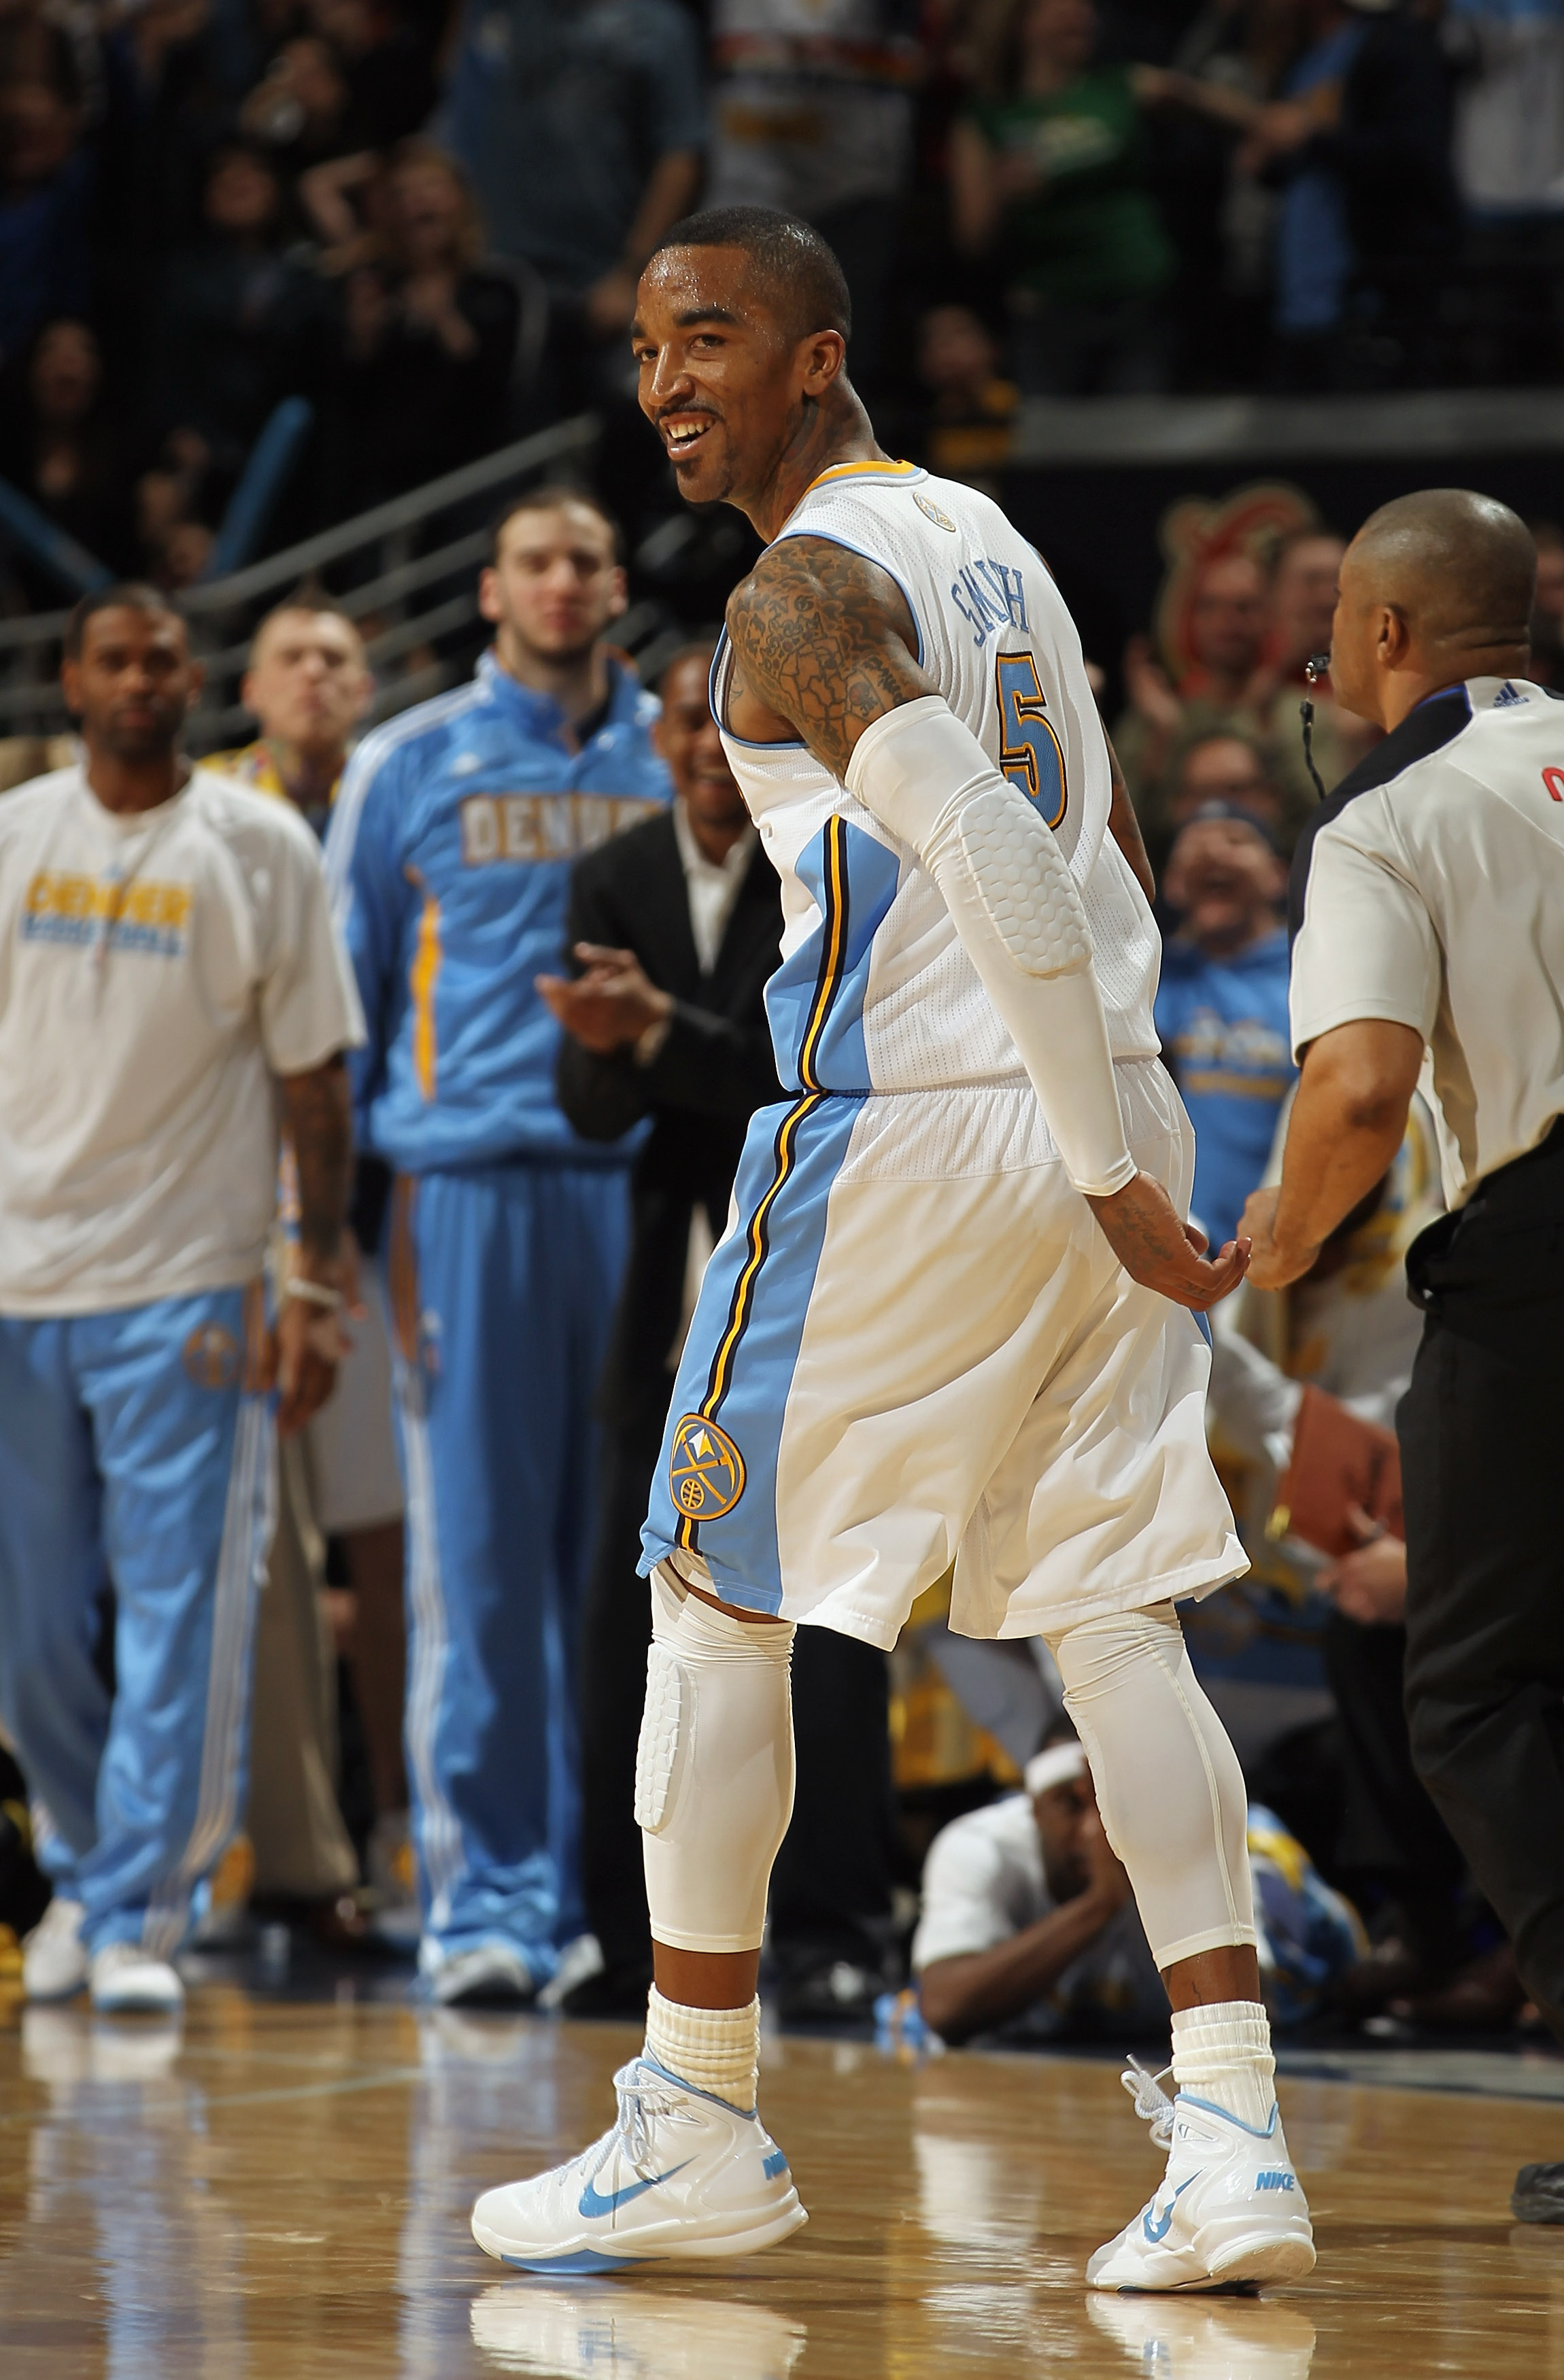 DENVER, CO - MARCH 23:  J.R. Smith #5 of the Denver Nuggets celebrates after scoring against the San Antonio Spurs to give the Nuggets their first lead of the game 99-98 in the fourth quarter at the Pepsi Center on March 23, 2011 in Denver, Colorado. The